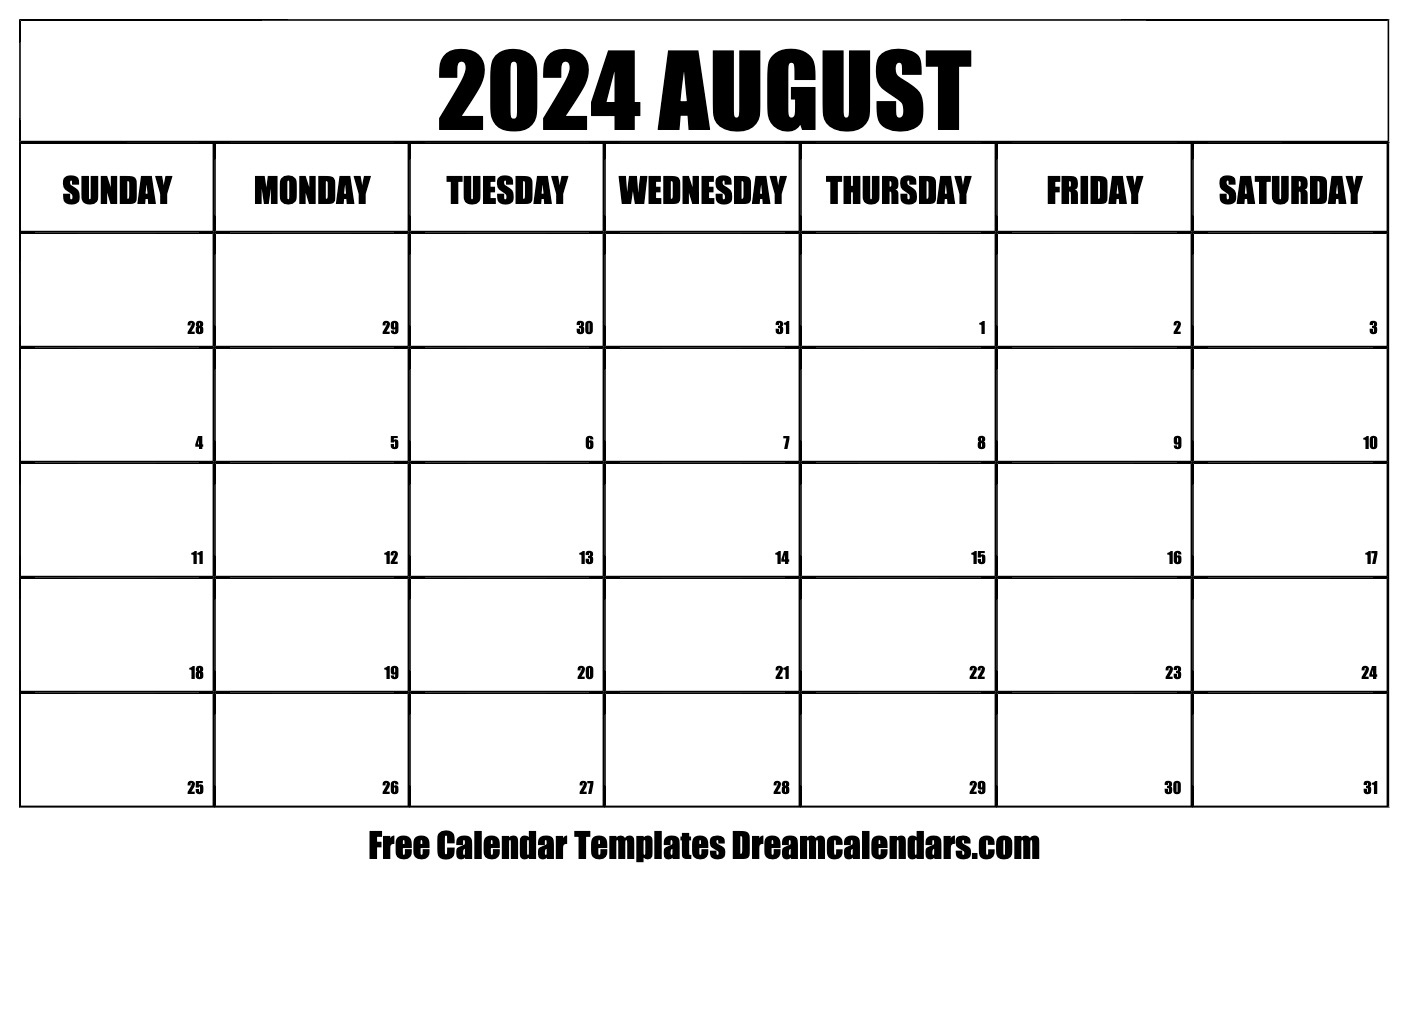 August 2024 Calendar | Free Blank Printable With Holidays with regard to Free Printable Calendar August 2024 To July 202